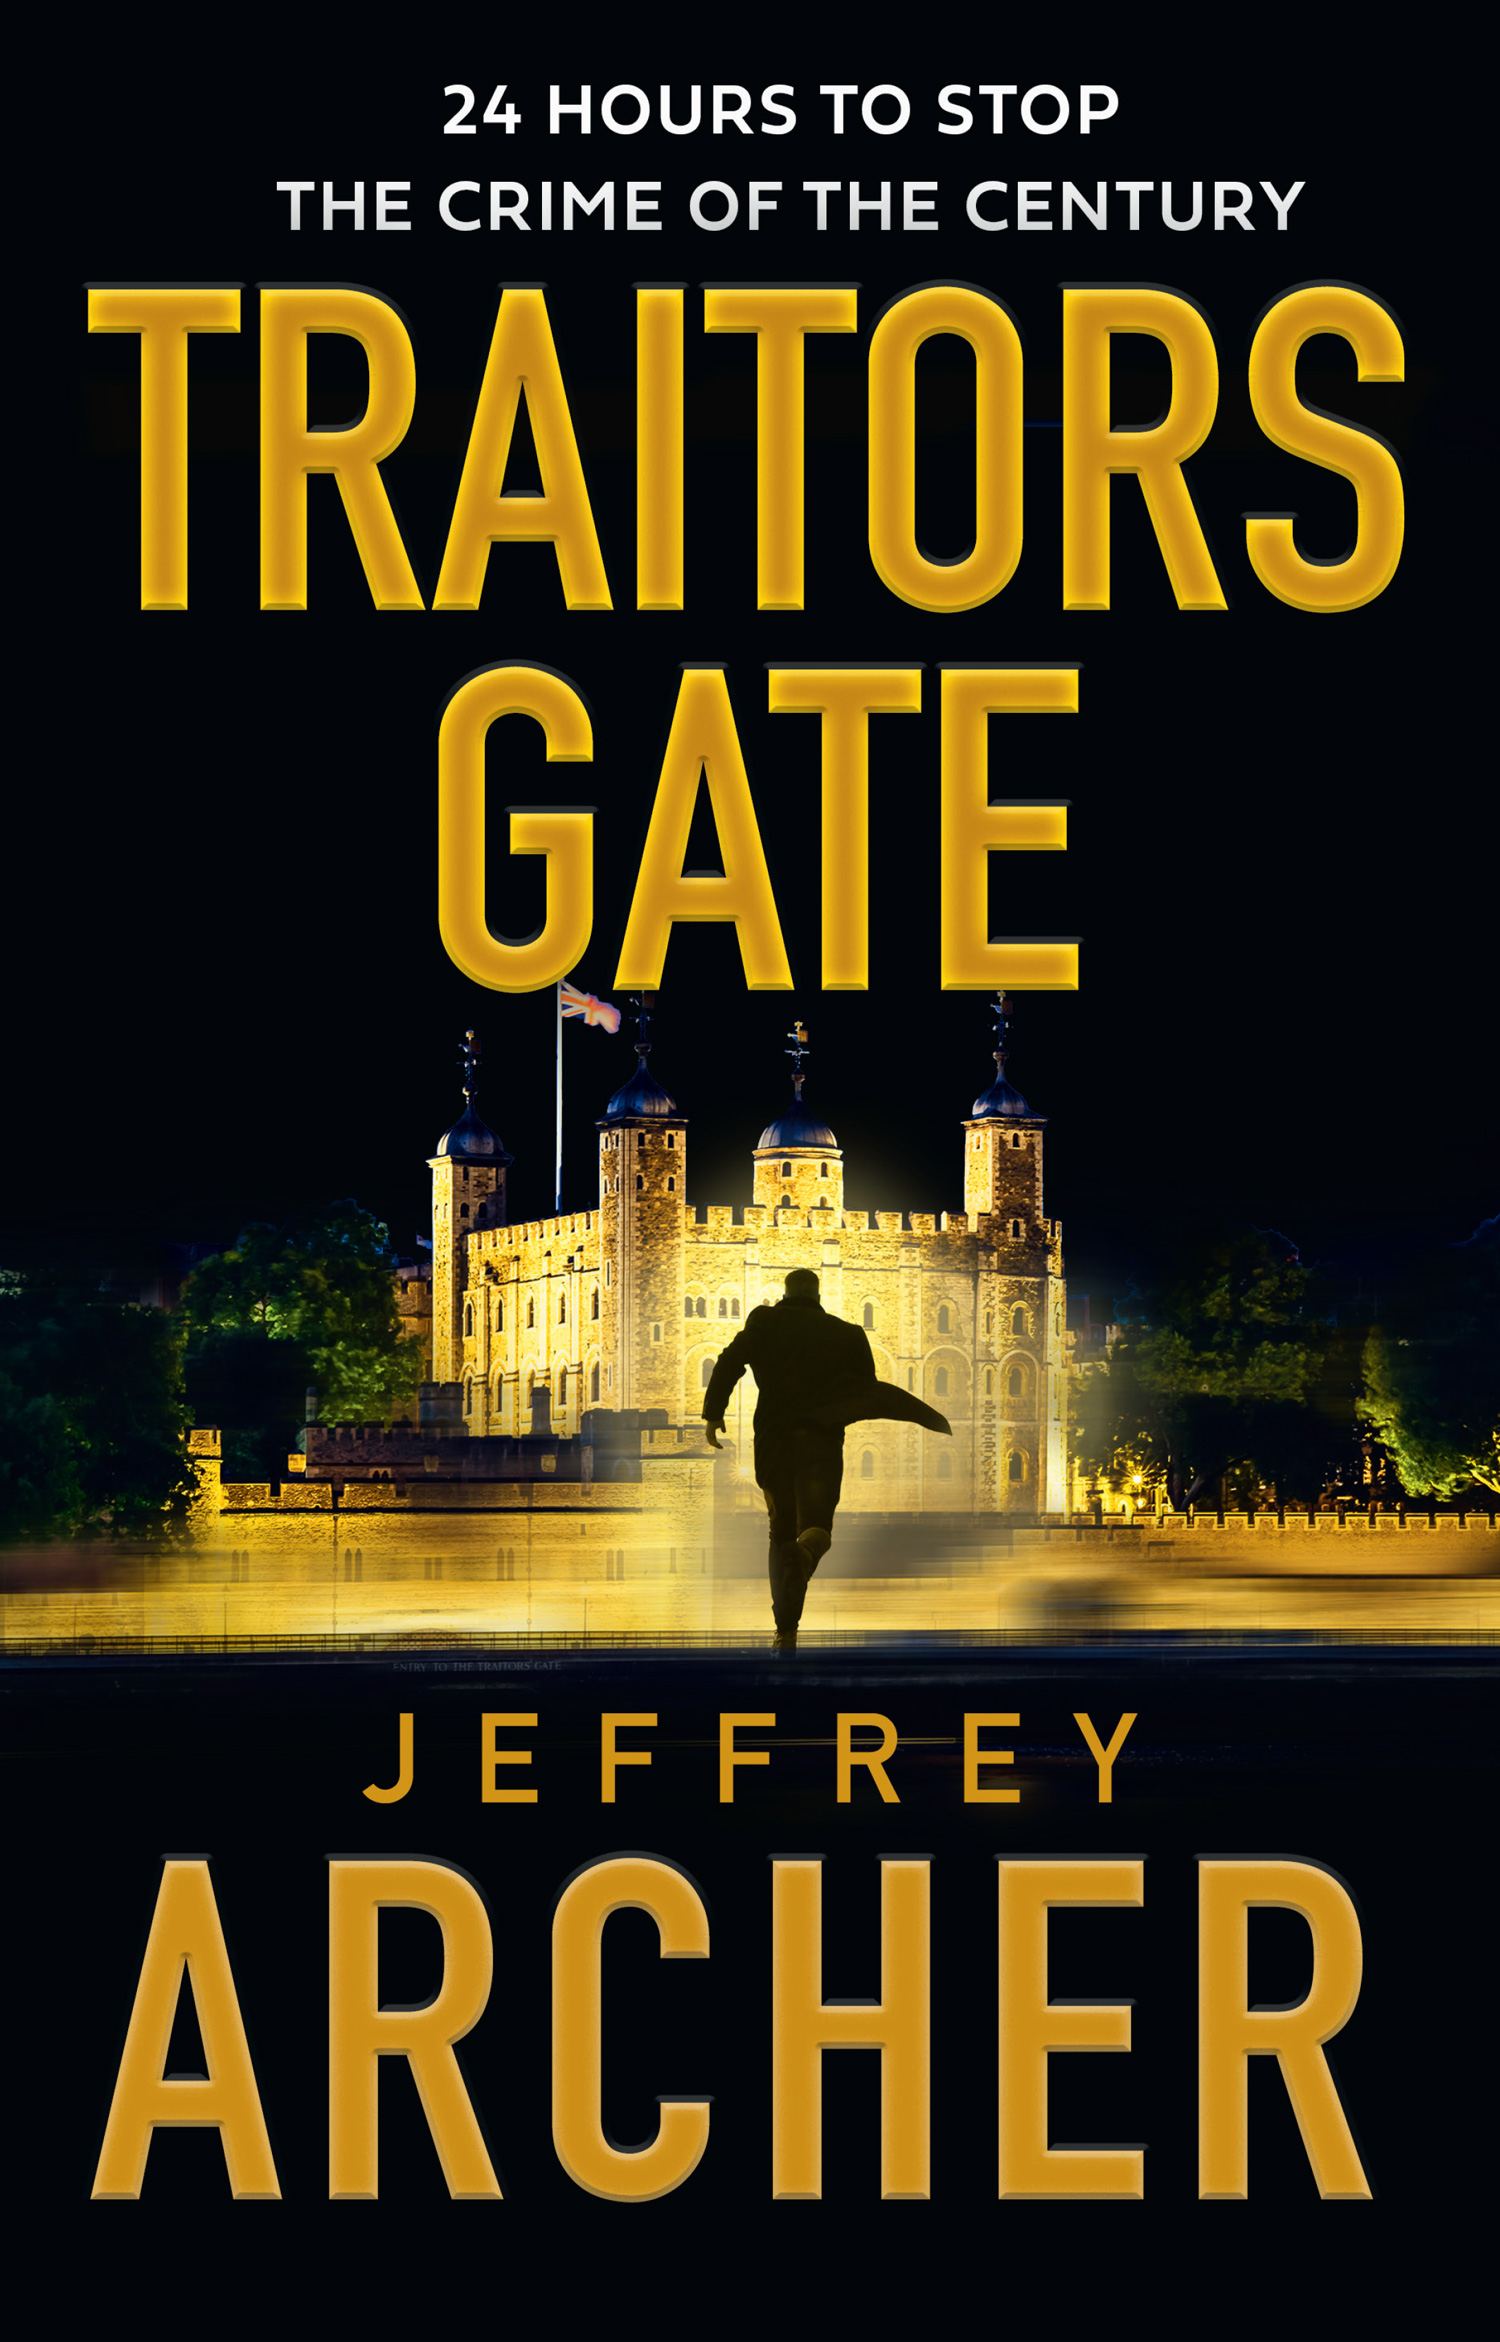 Traitors gate US cover. The latest Jeffrey Archer book, one of the William Warwick novels.